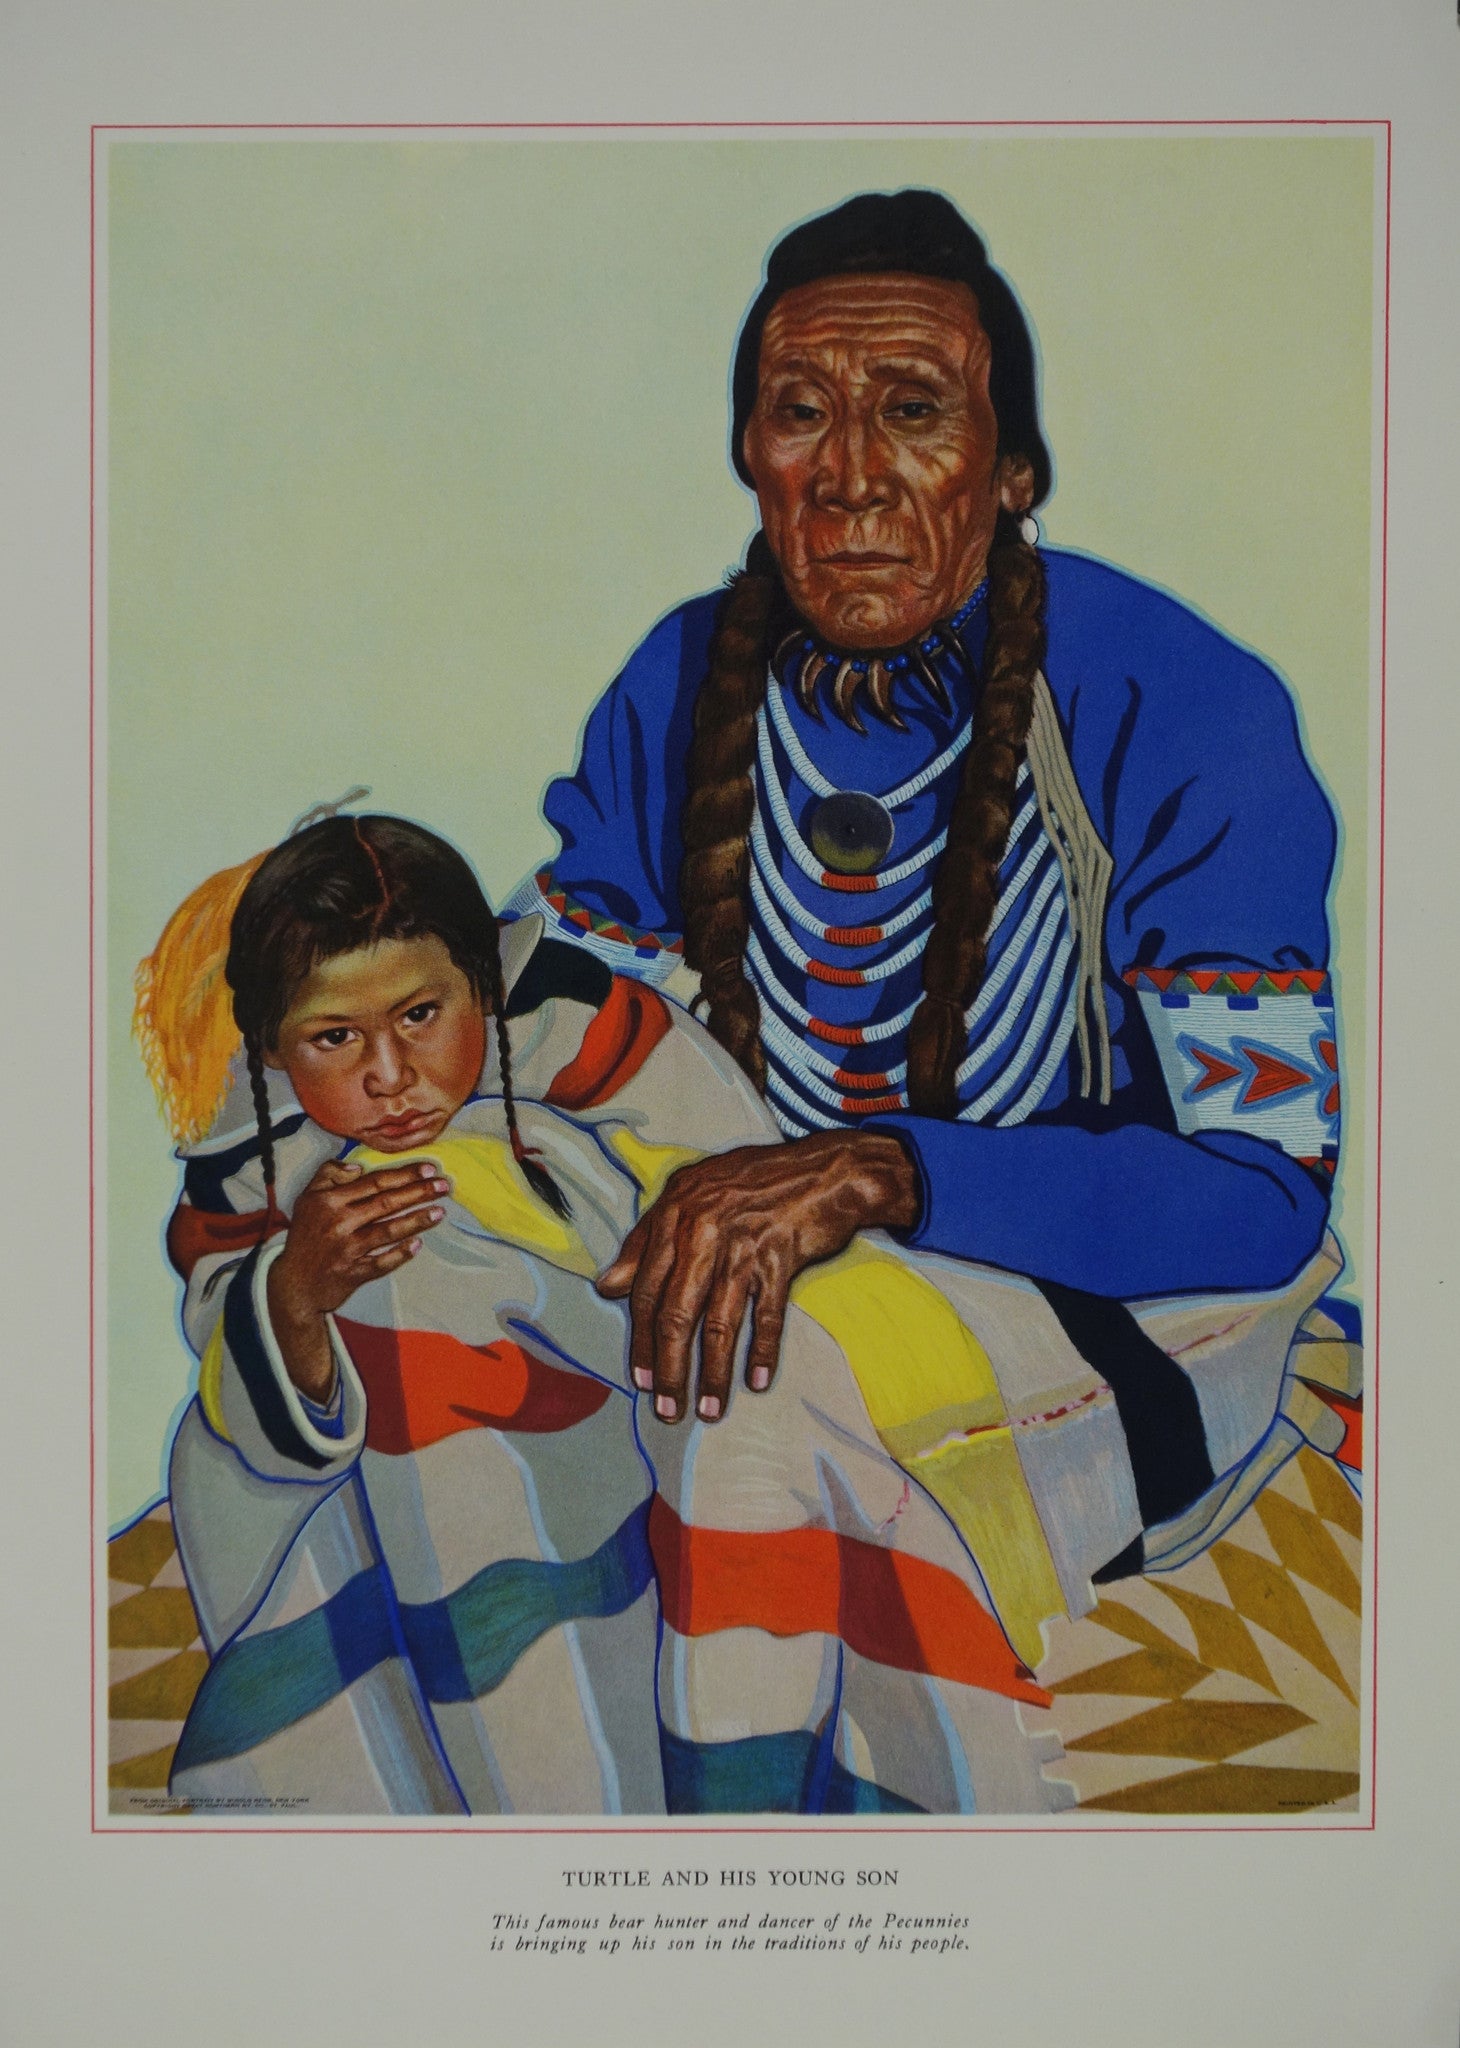 Portrait of Blackfeet Indian - Turtle and his Young Son